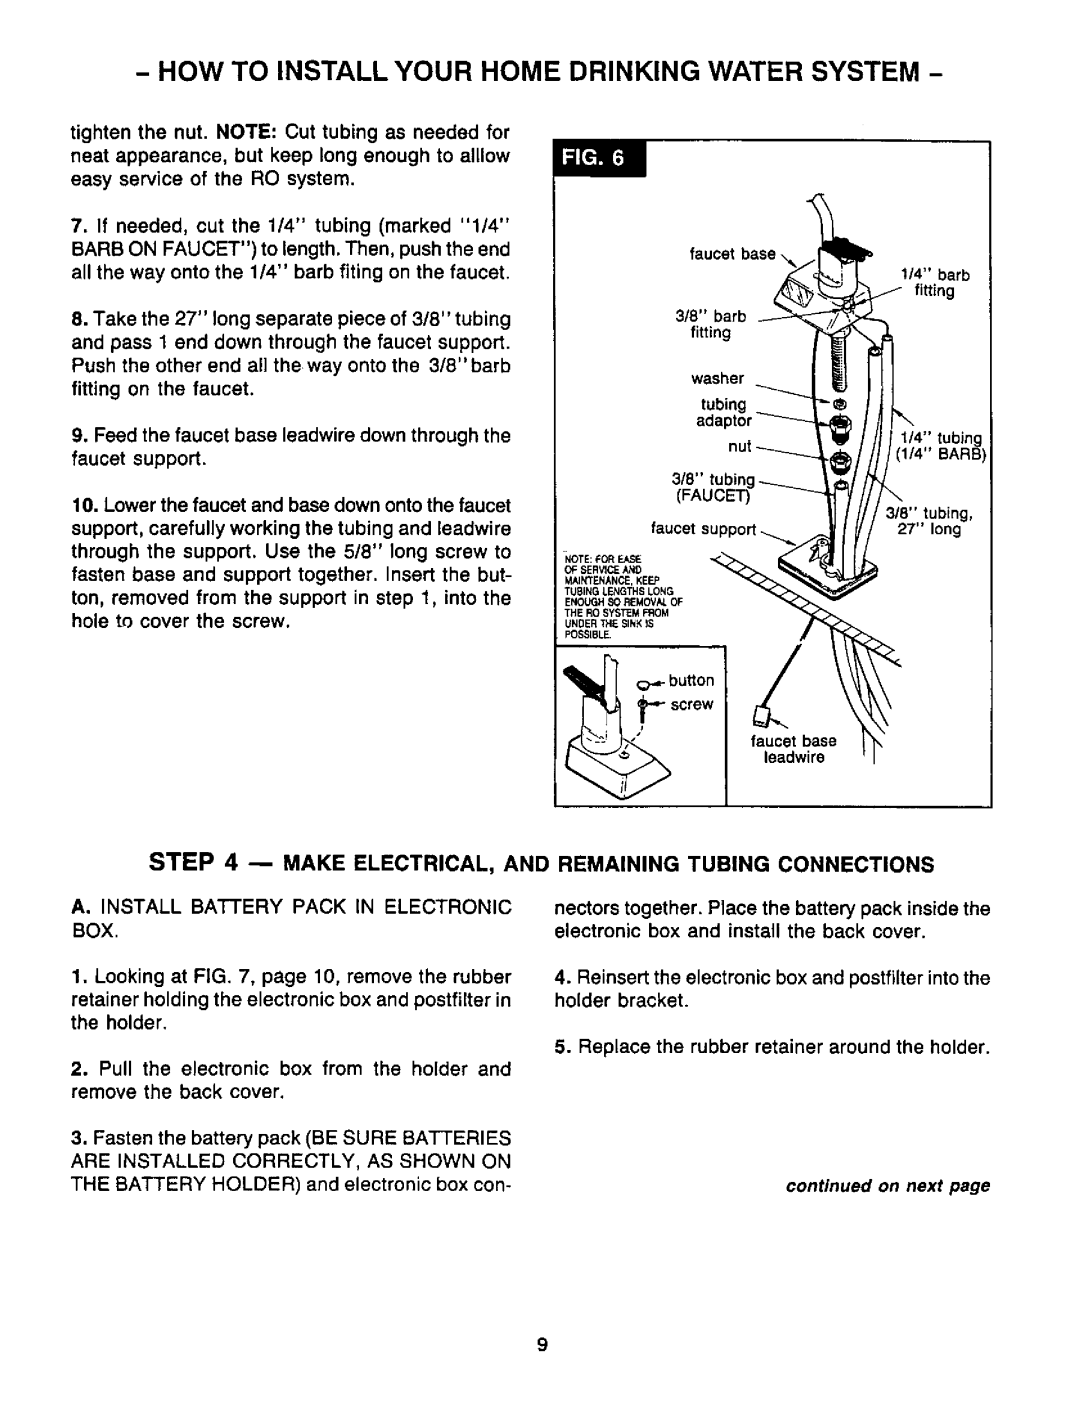 Sears RO 2000 manual Make Electrical, And Remaining Tubing Connections, How To Install Your Home Drinking Water System 